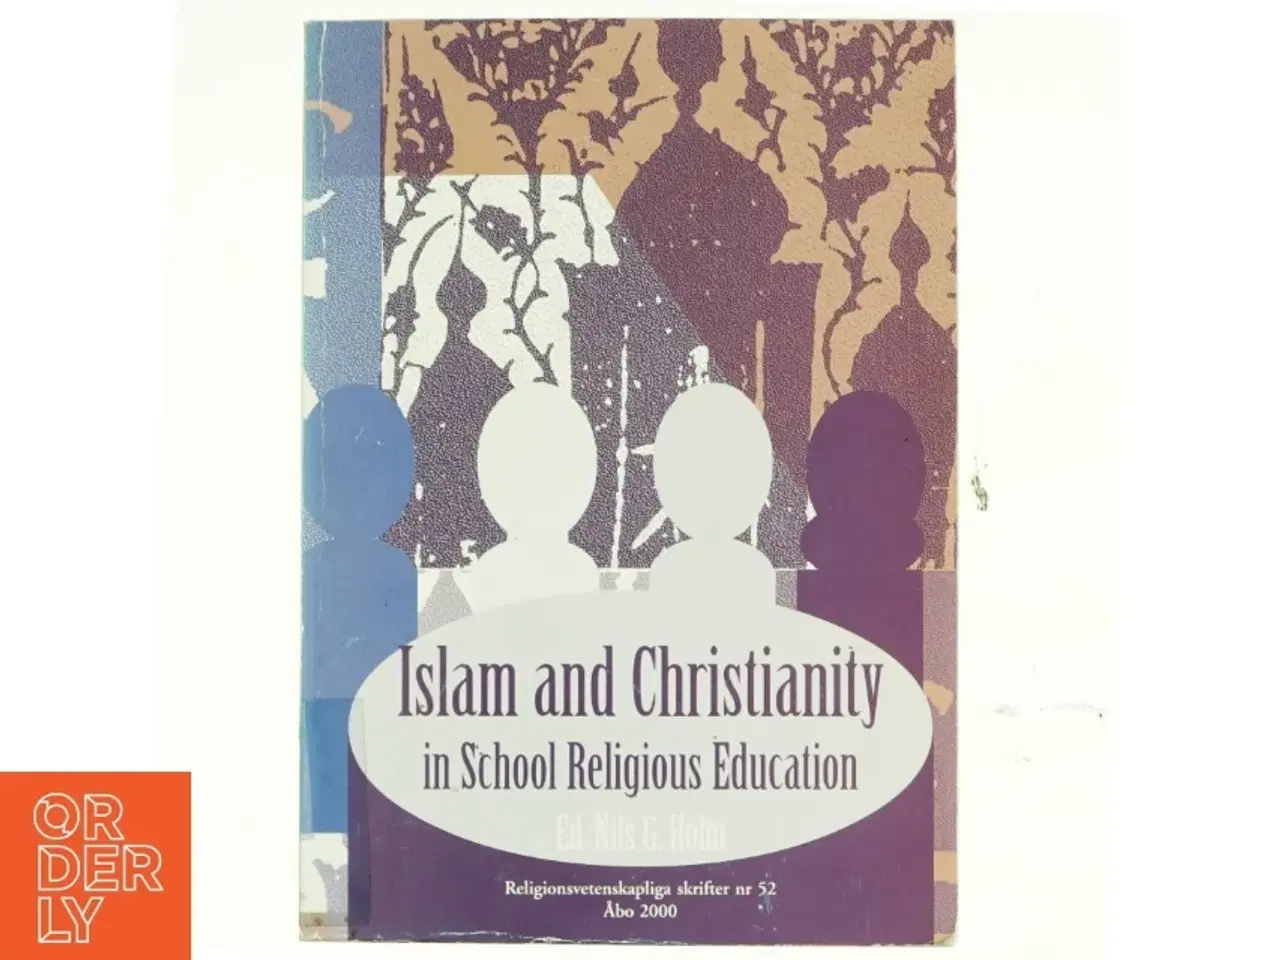 Billede 1 - Islam and Christianity in School Religious Education – Nils G. Holm